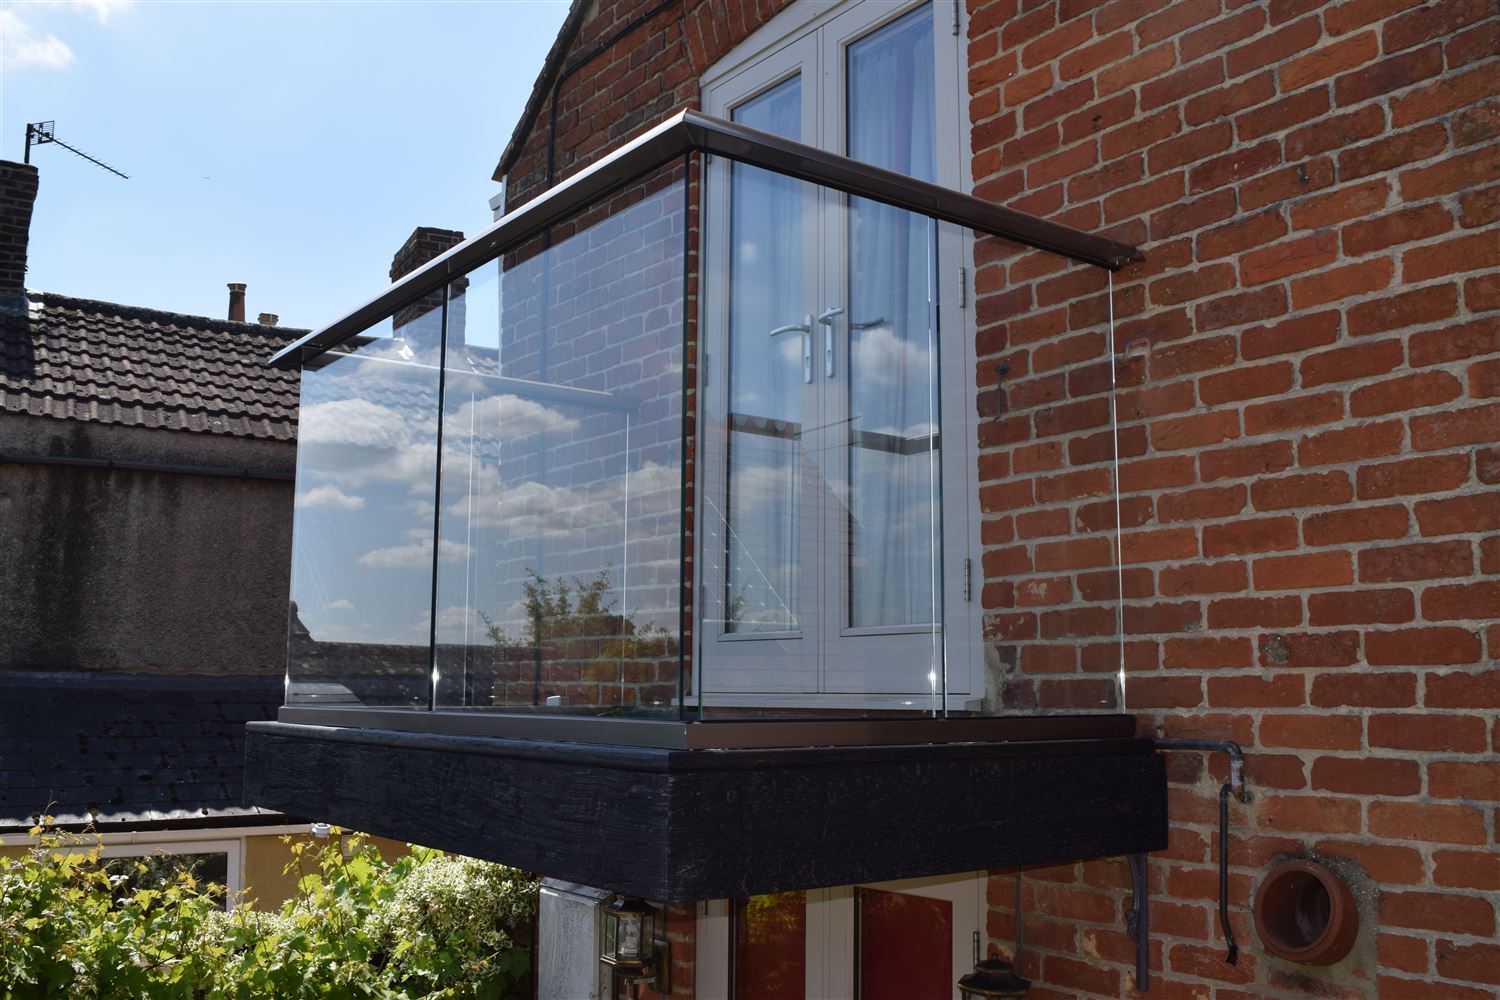 Aerofoil Glass Balustrade system installed on a 150 year-old property in North Bradley, Wiltshire.